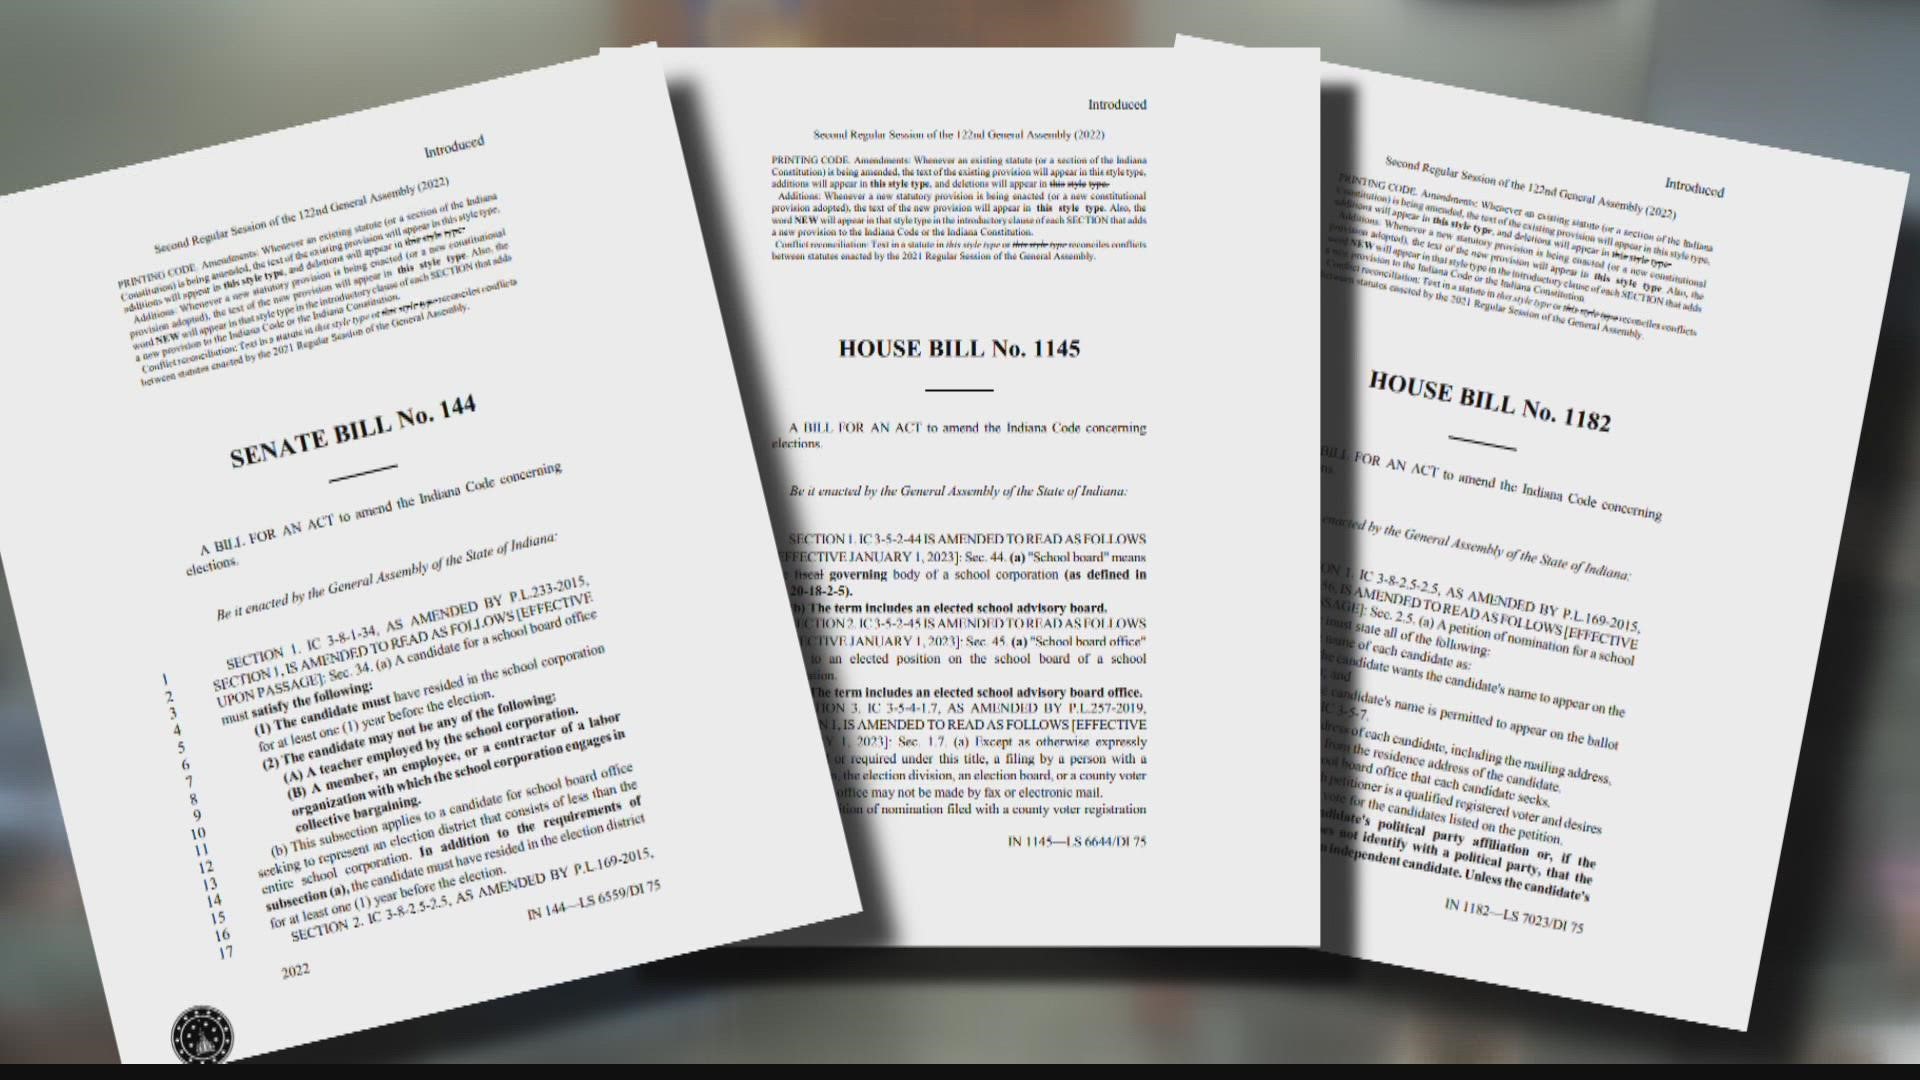 13Investigates spoke to Hoosiers about three proposed bills centered around school board operations.